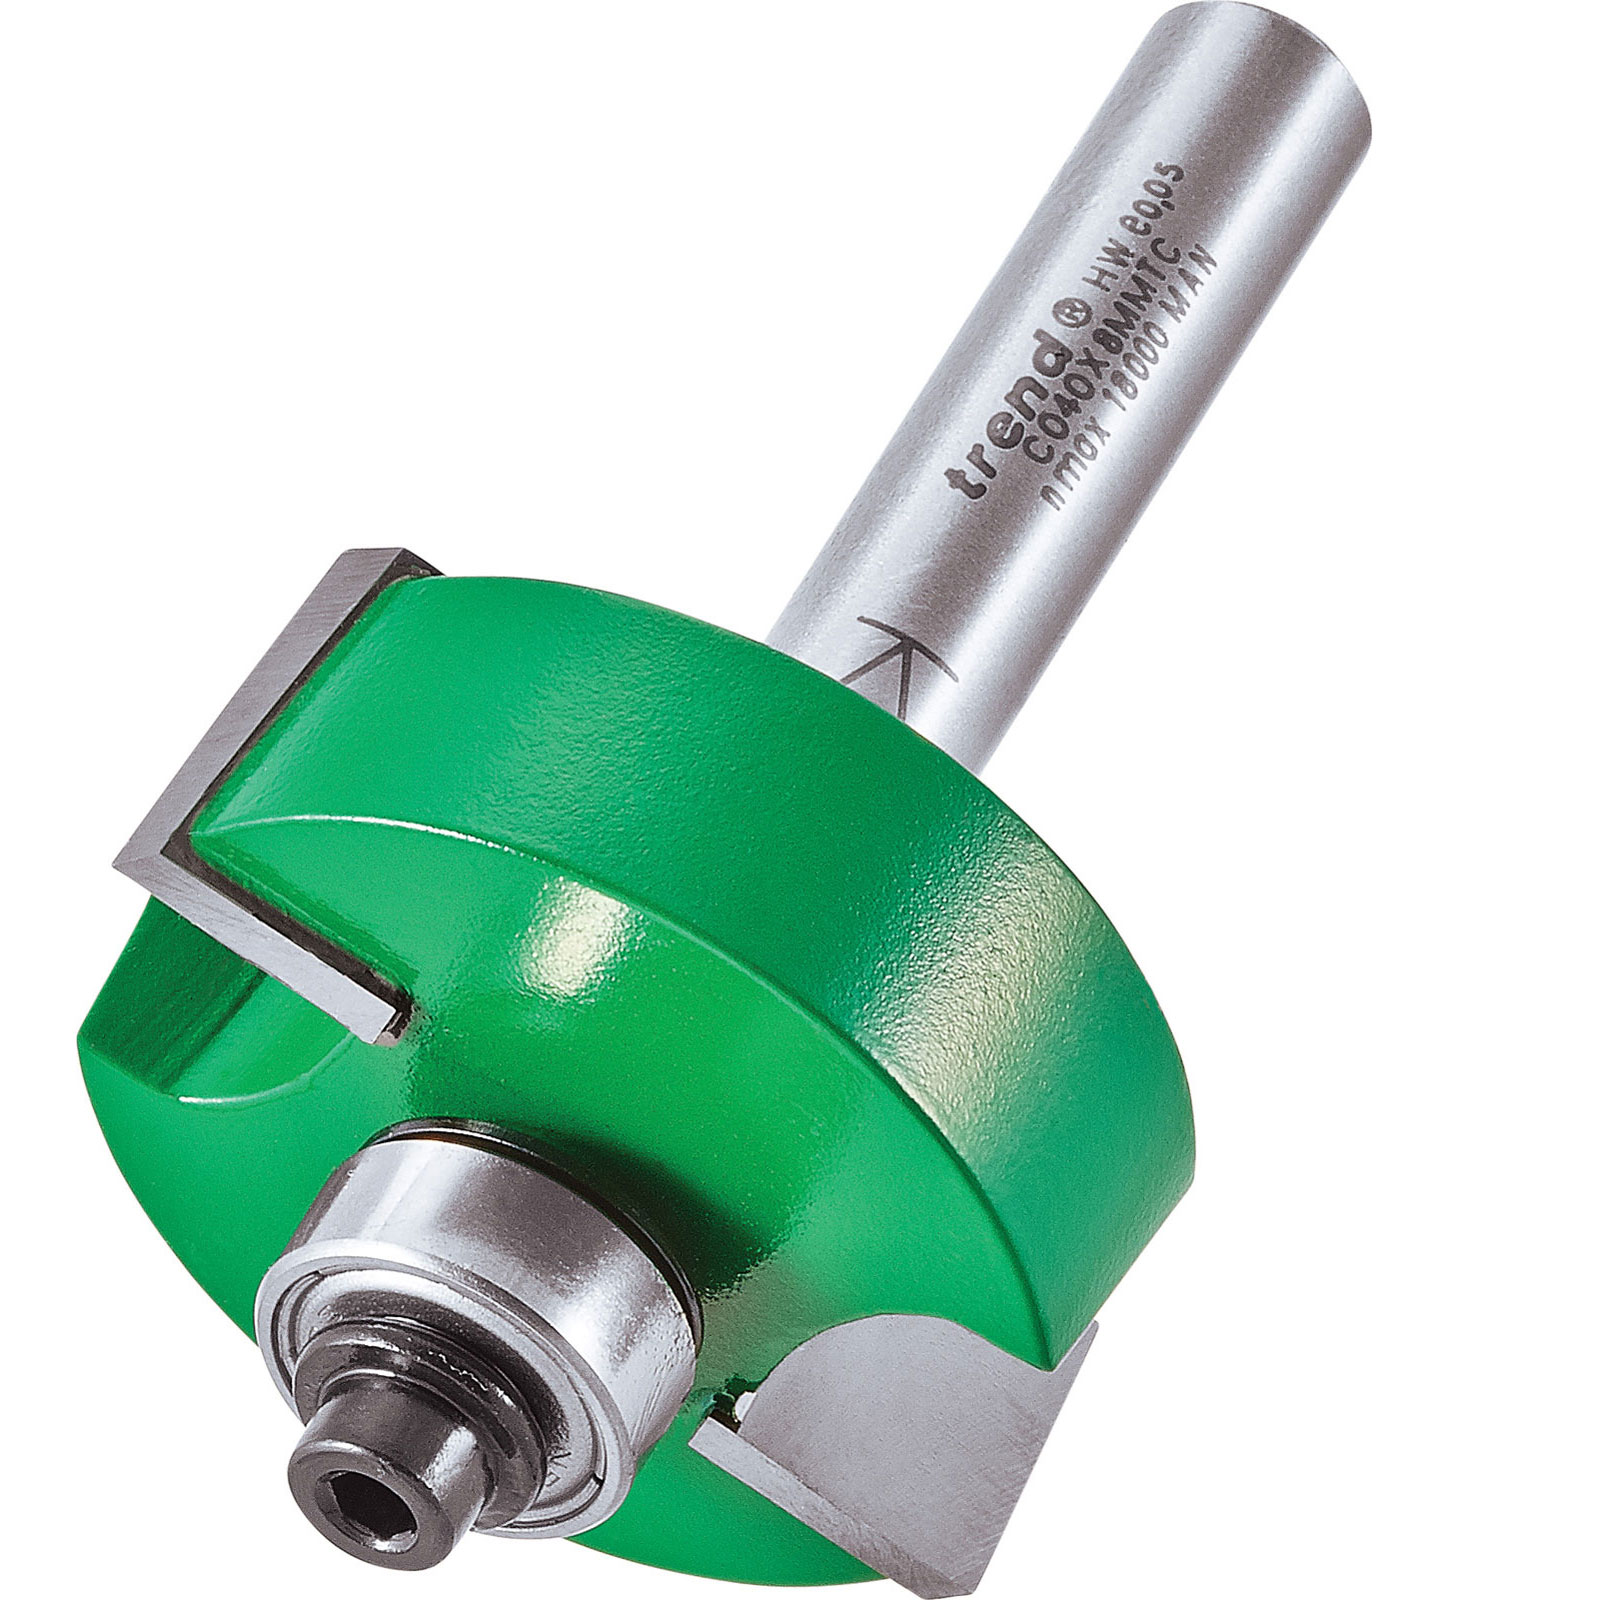 trend-bearing-self-guided-rebate-router-cutter-35mm-12-7mm-8mm-26-95